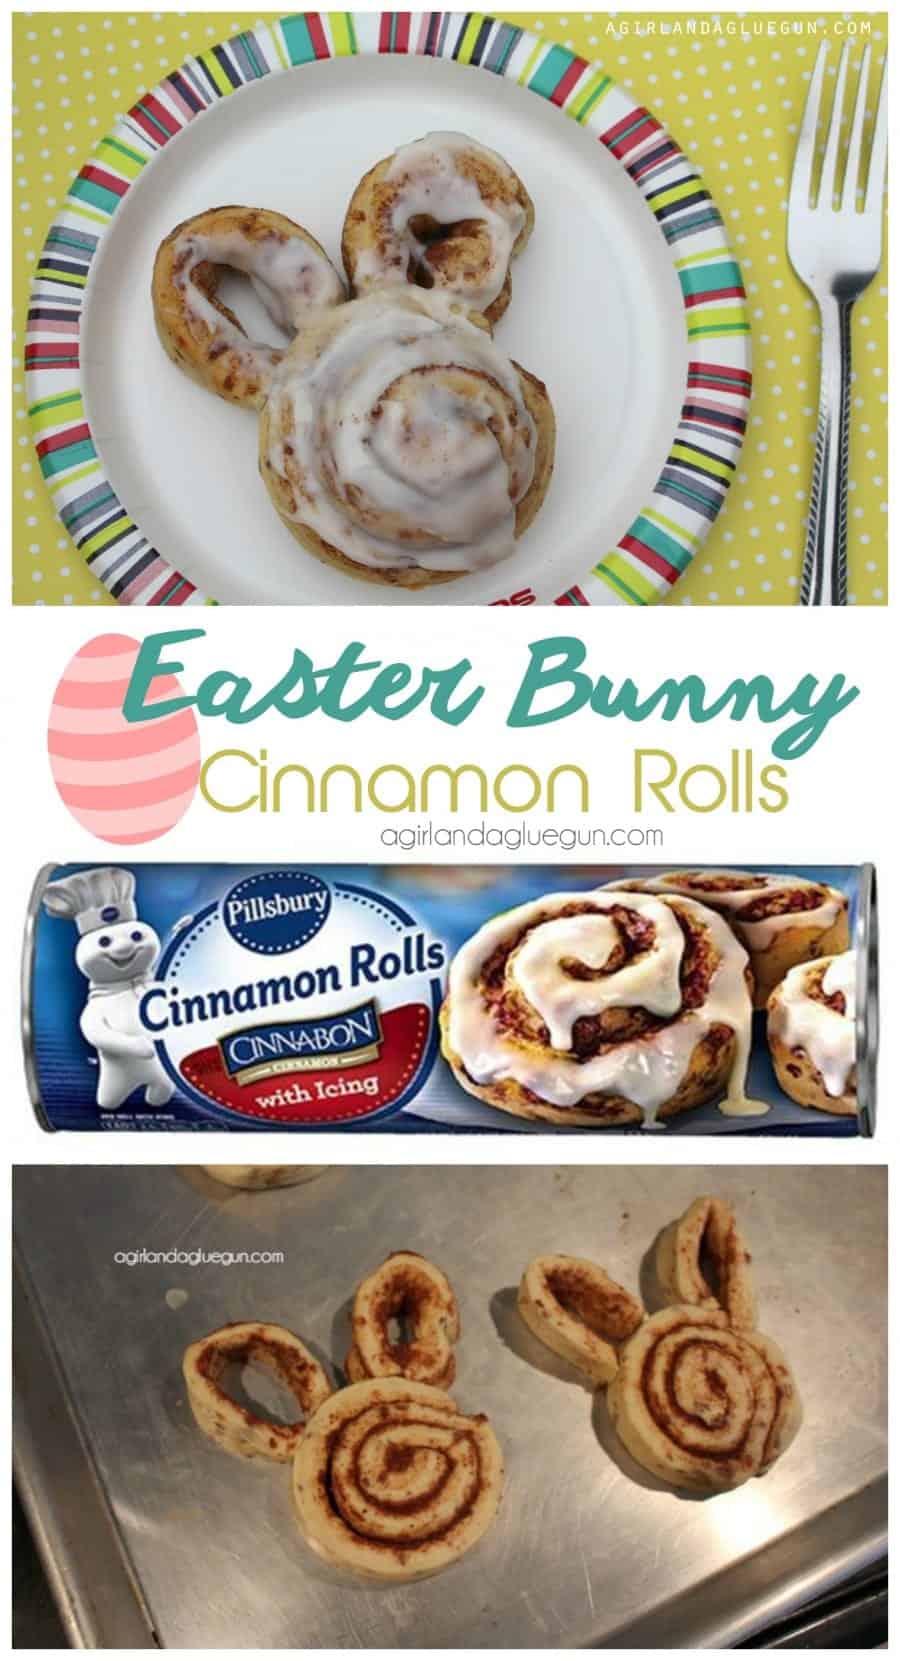 easy easter bunny cinnamon rolls made from store bought rolls. perfect for Easter morning breakfast or brunch